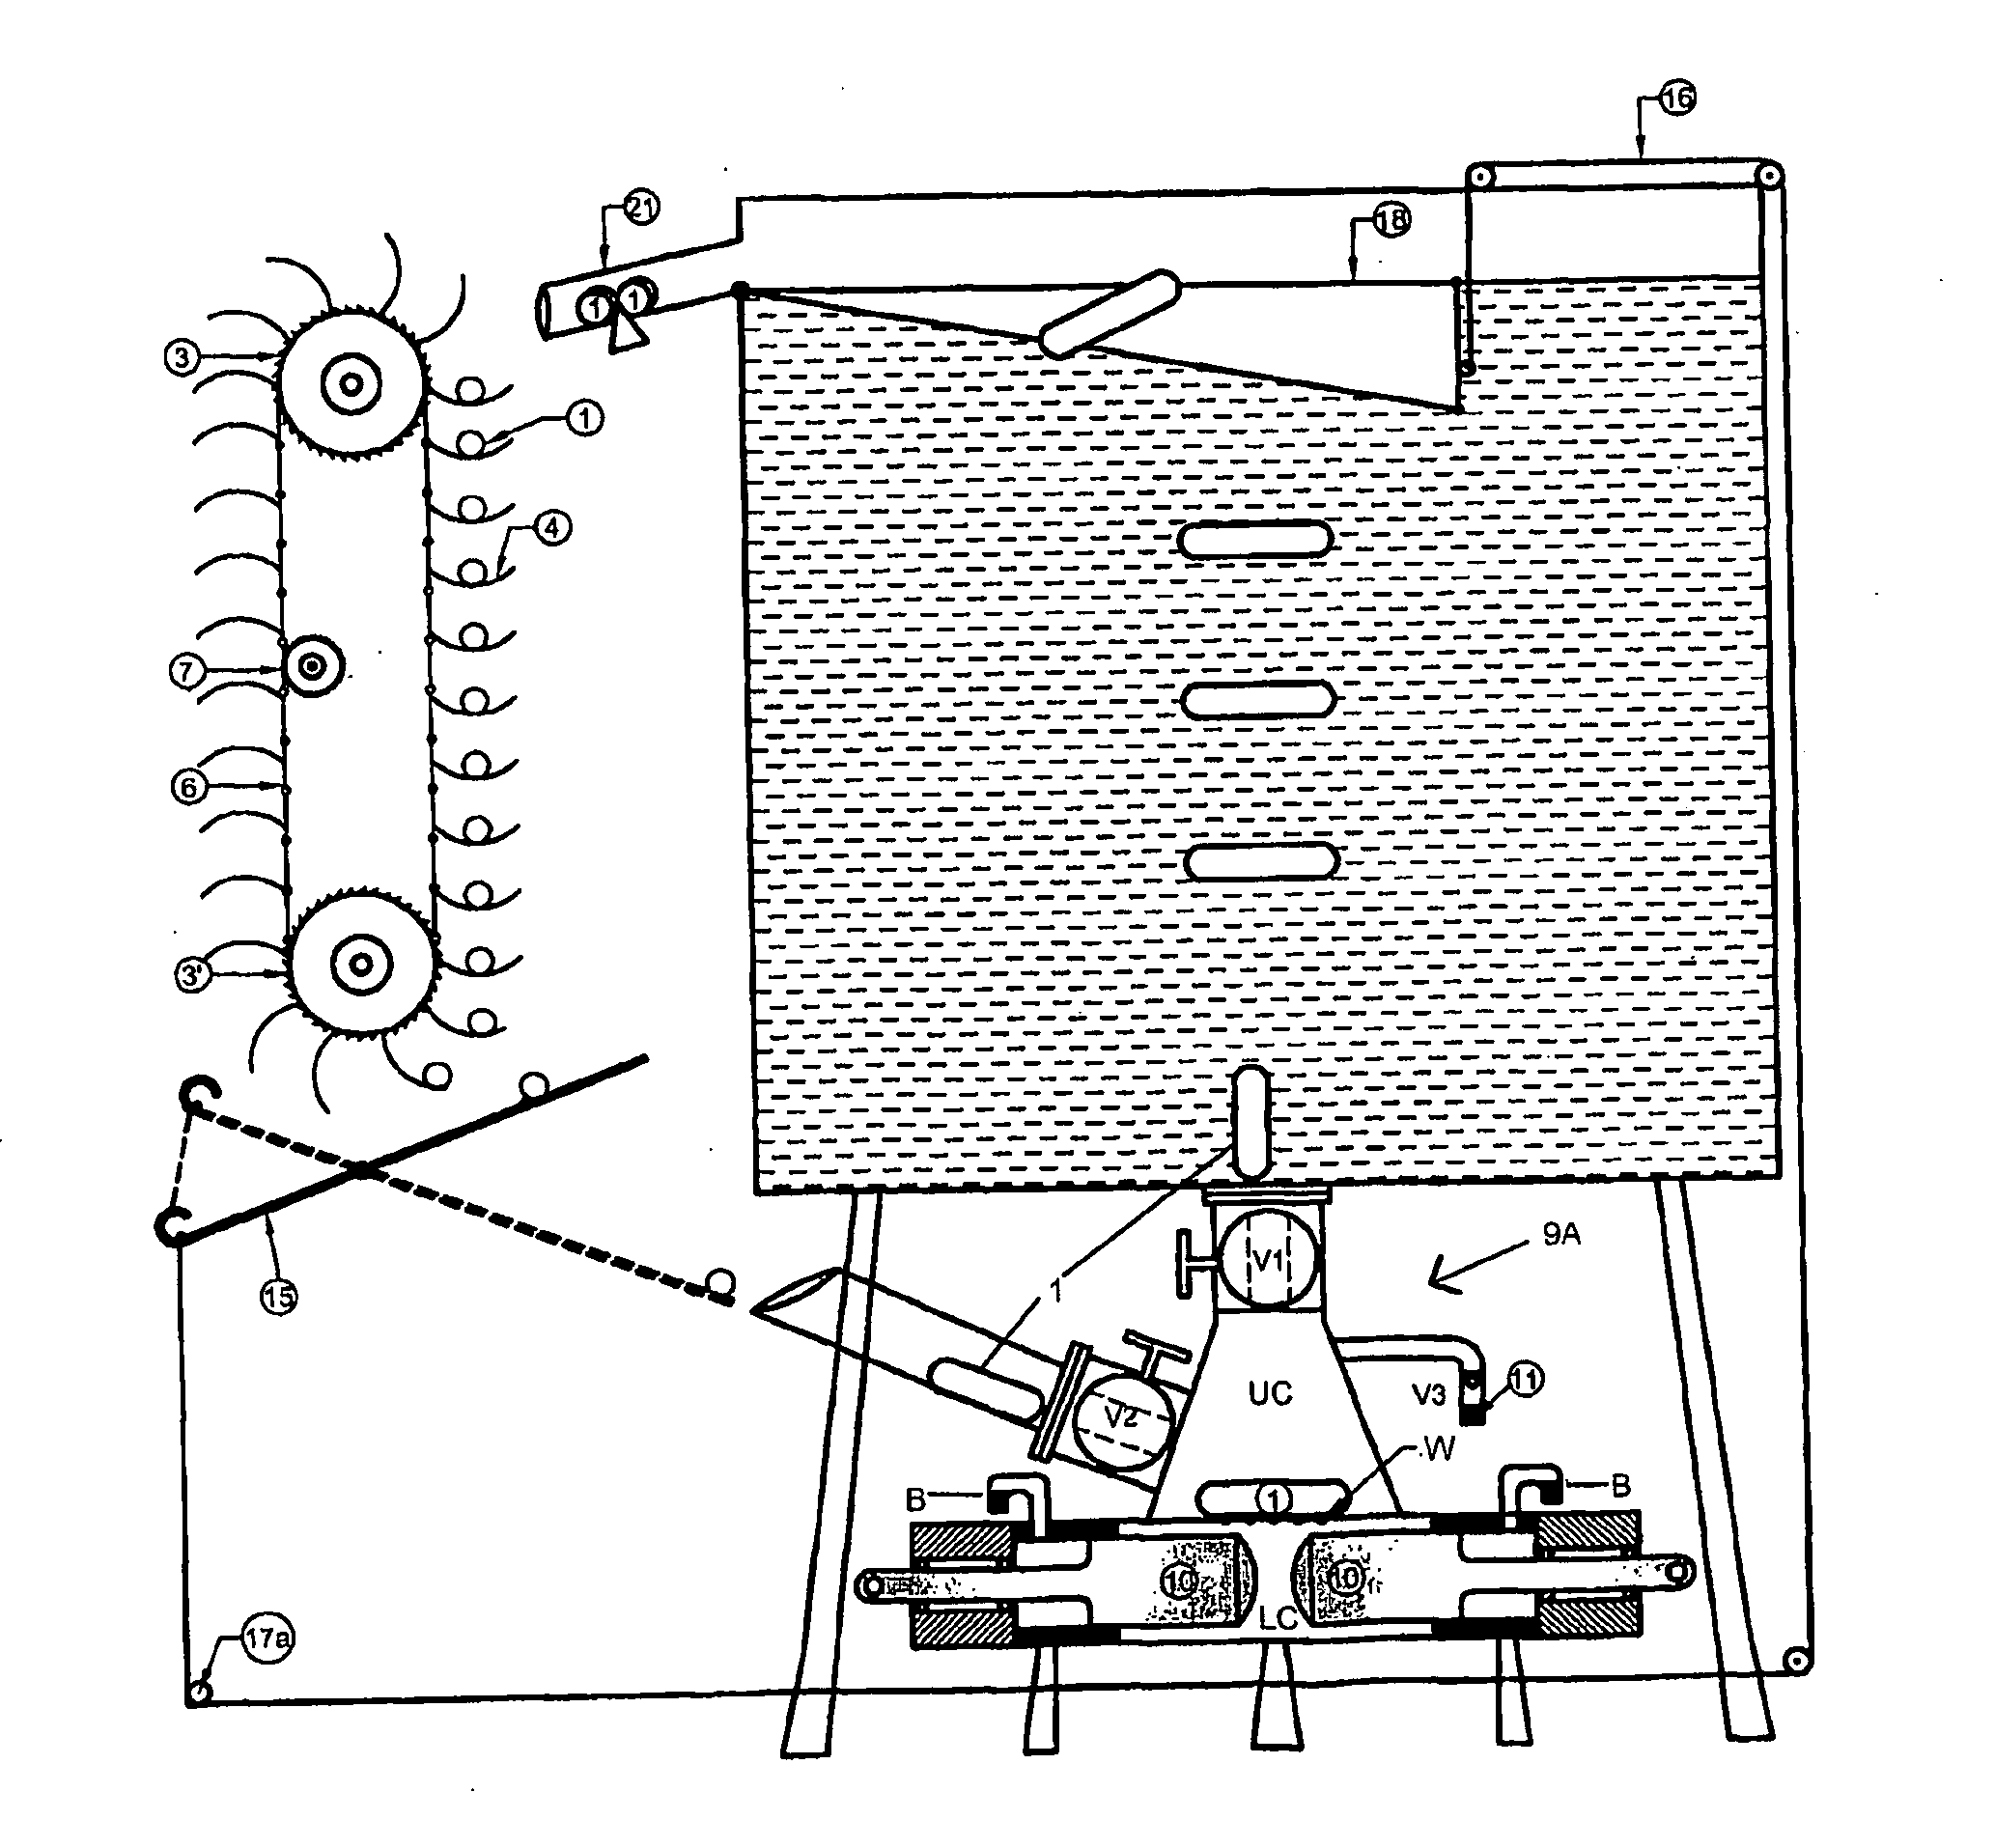 An engine using potential and buoyancy energy with de pressure transfer box